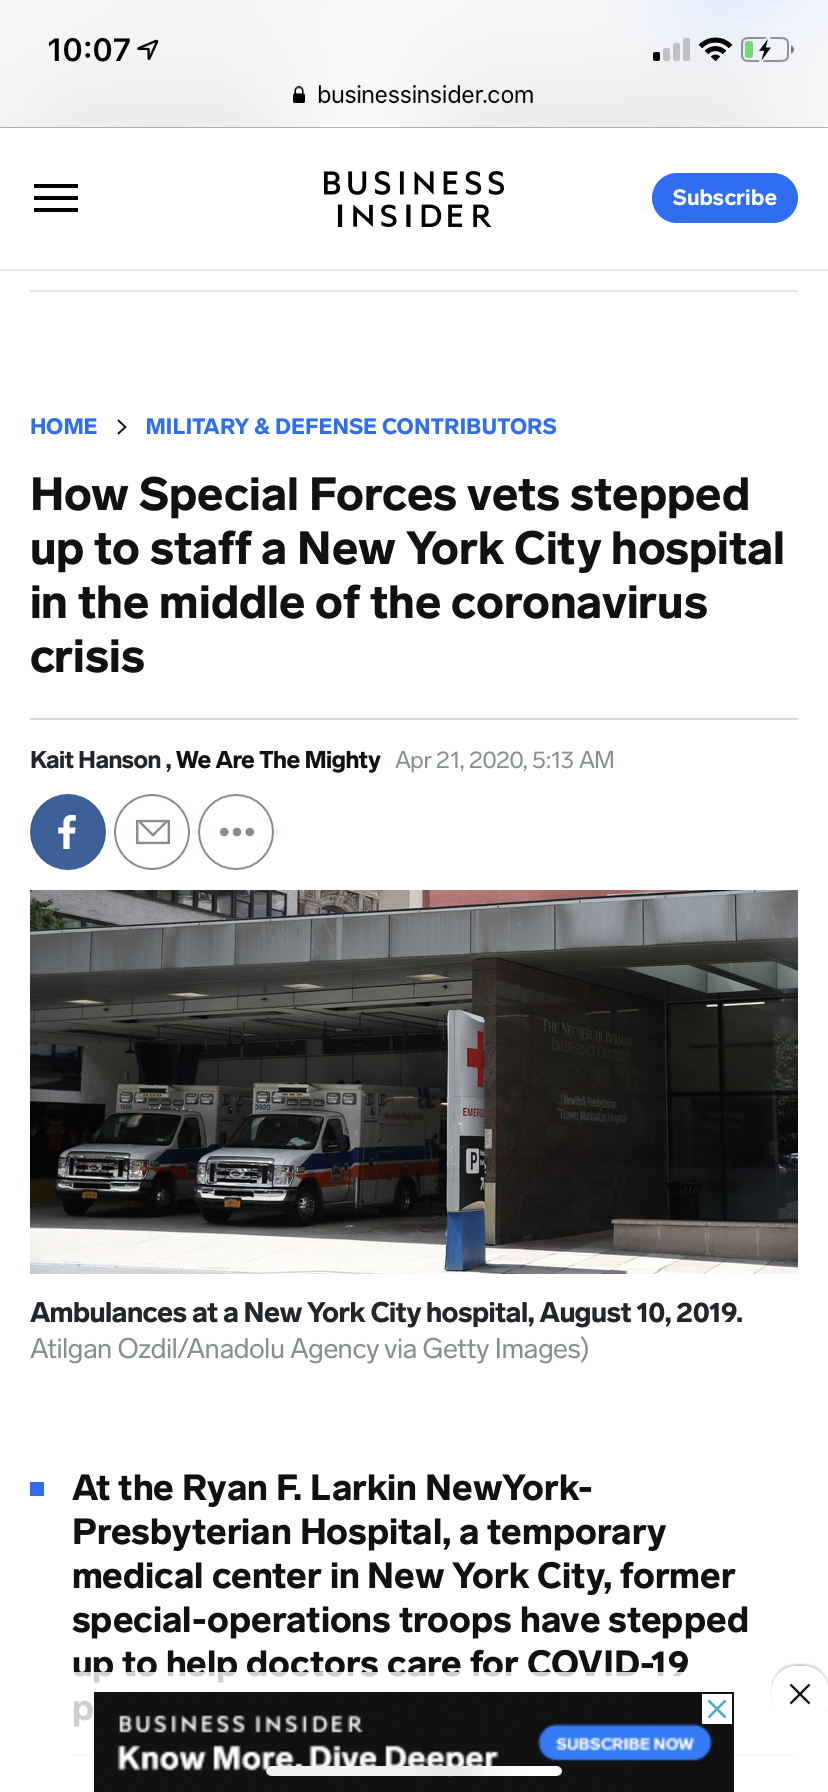 Business Insider + We Are The Mighty - Pop-up hospital in NYC for coronavirus